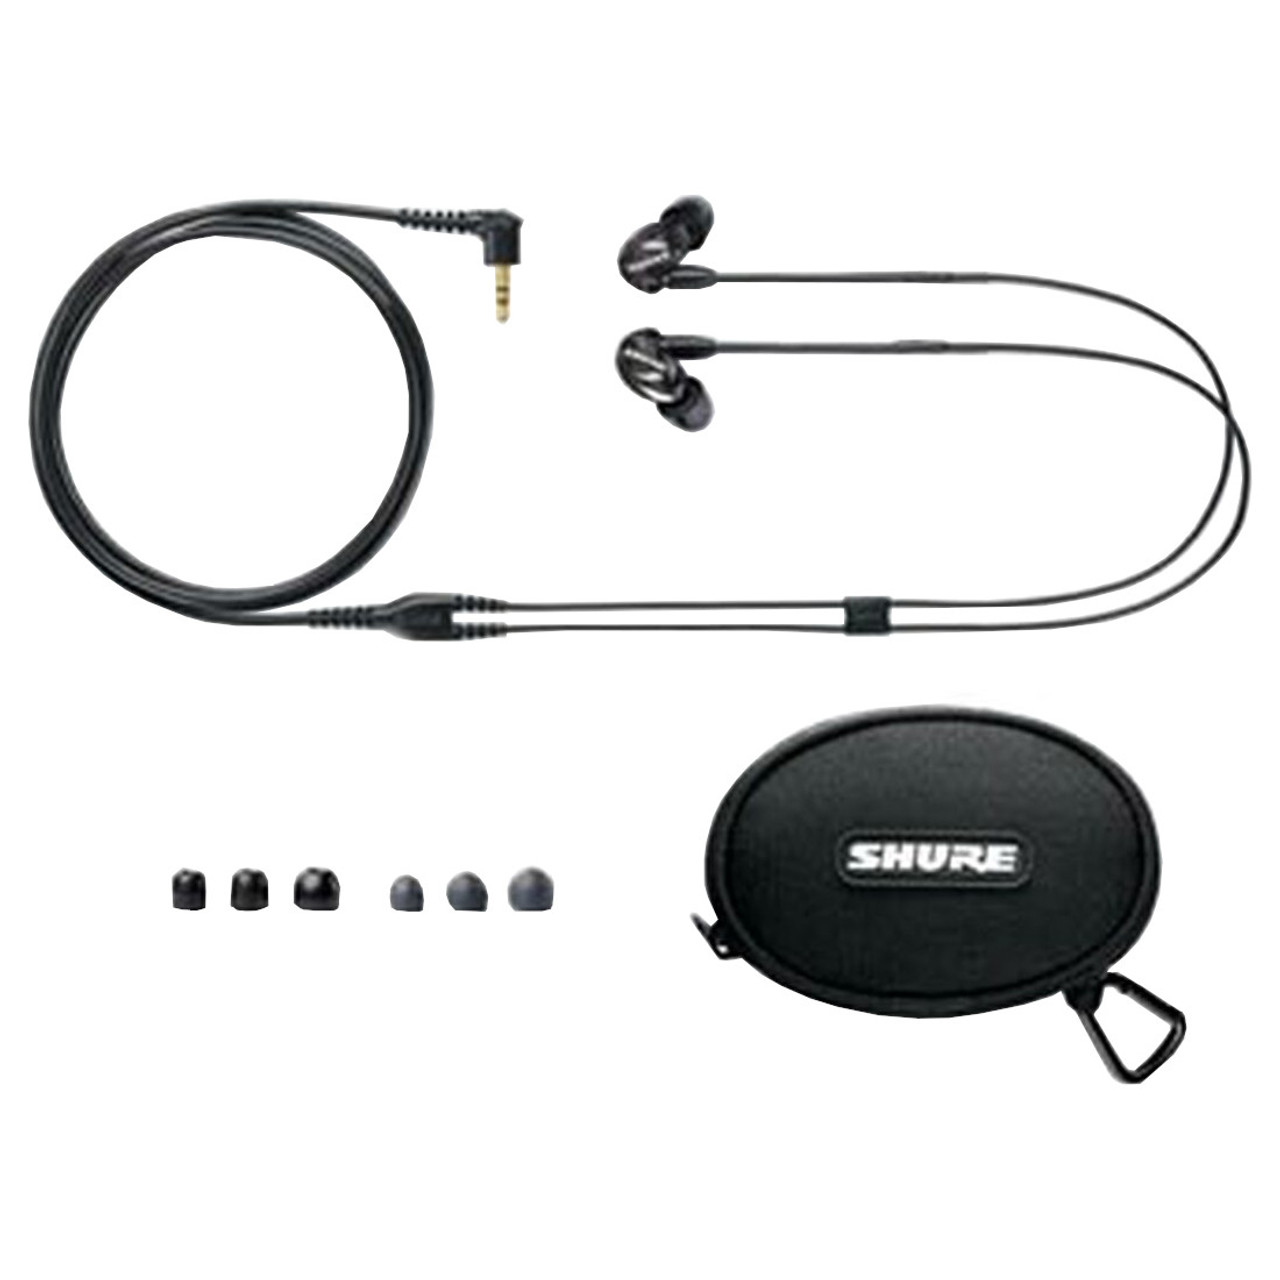 Shure SE215 Pro Green Sound Isolating Earphones - Sound Productions